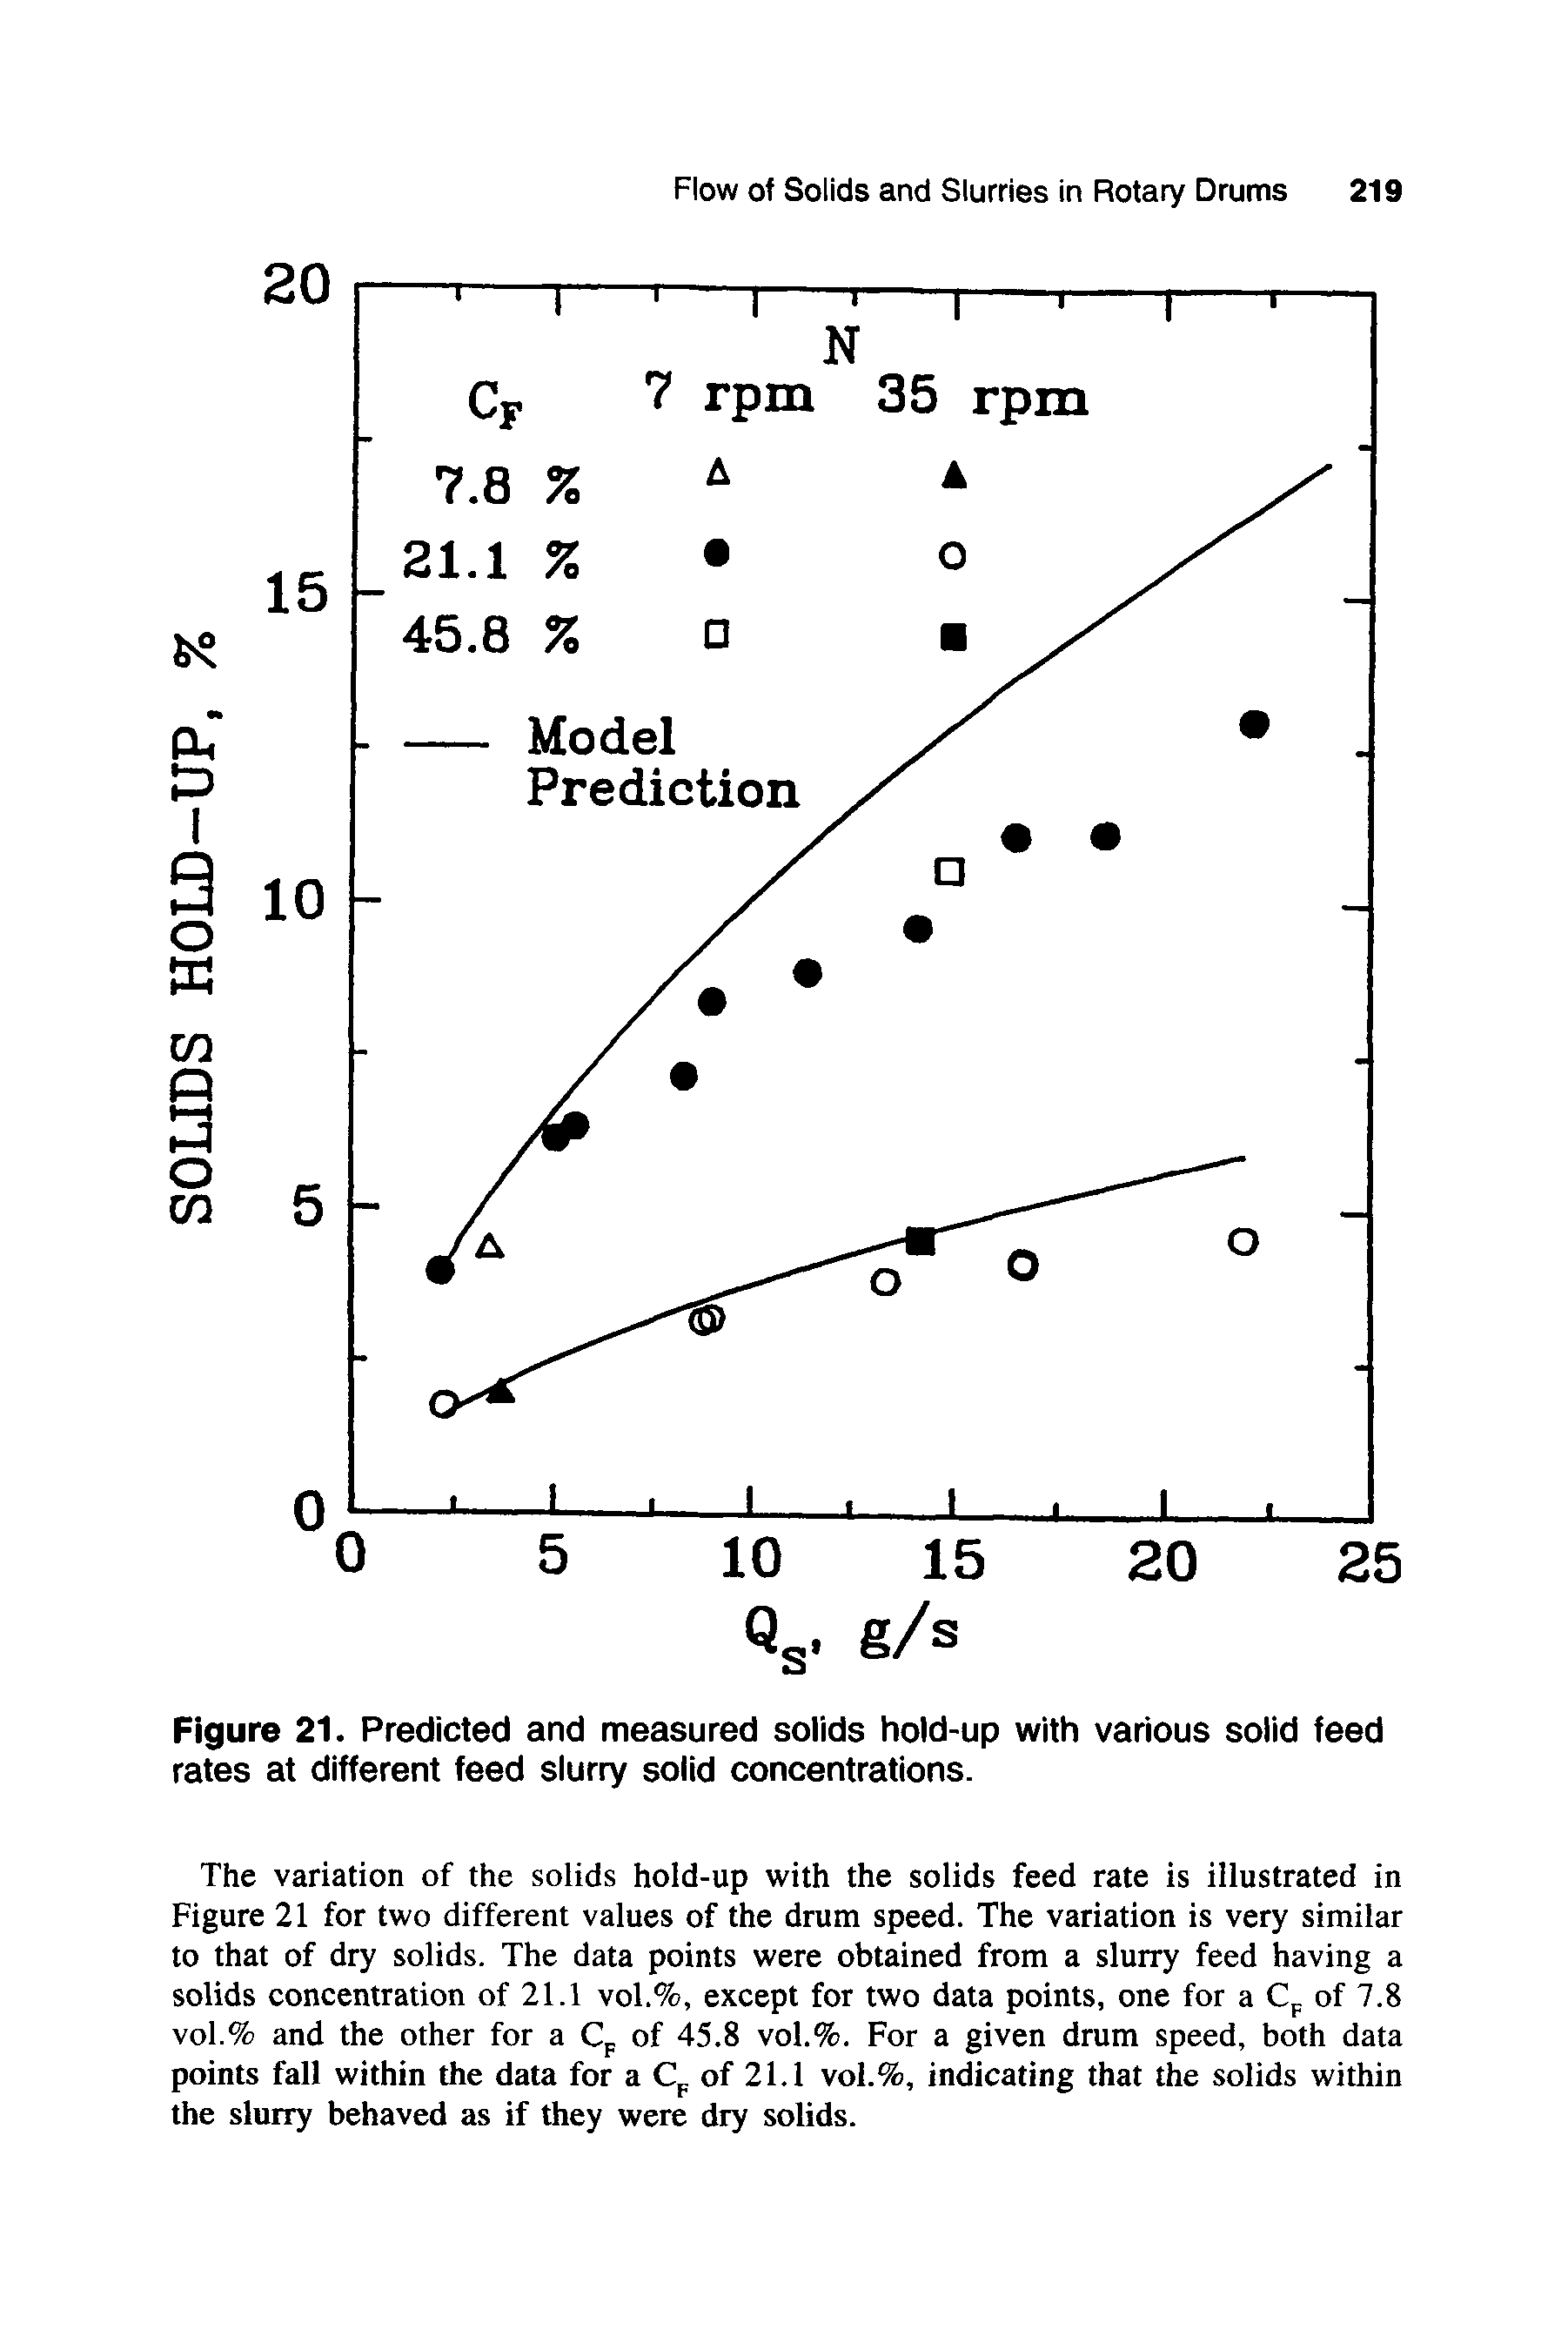 Figure 21. Predicted and measured solids hold-up with various solid feed rates at different feed slurry solid concentrations.